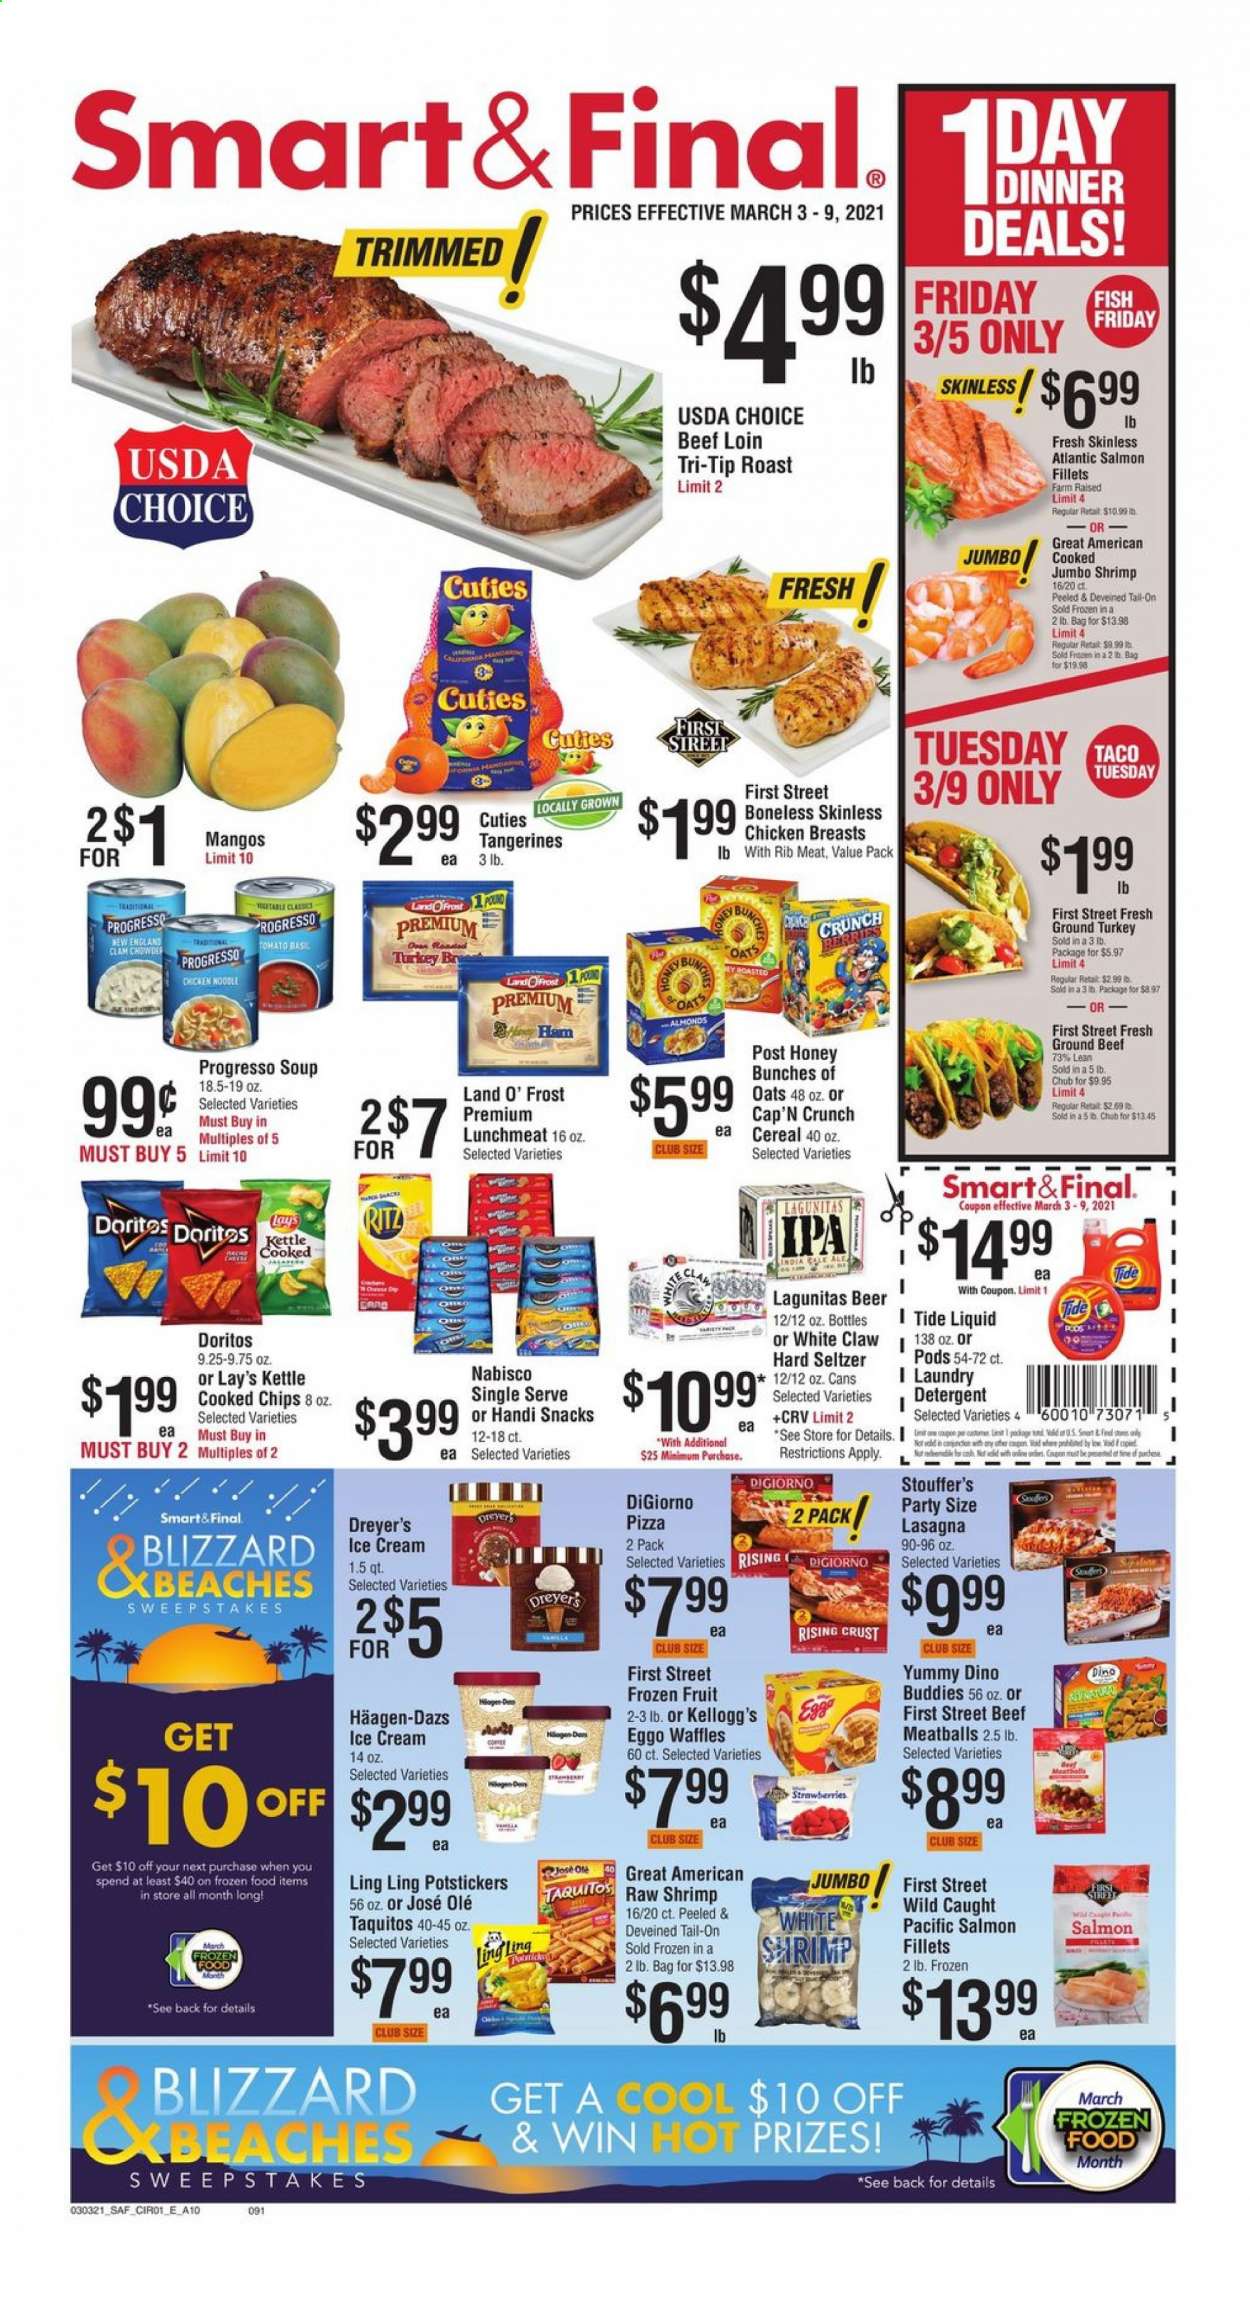 thumbnail - Smart & Final Flyer - 03/03/2021 - 03/09/2021 - Sales products - waffles, clams, salmon, salmon fillet, fish, shrimps, pizza, meatballs, Progresso, lasagna meal, Yummy Dino Buddies, taquitos, ham, lunch meat, ice cream, Häagen-Dazs, mango, strawberries, Stouffer's, Kellogg's, RITZ, Doritos, snack, Lay’s, oats, cereals, Cap'n Crunch, seltzer water, White Claw, Hard Seltzer, beer, IPA, ground turkey, chicken breasts, beef meat, ground beef, Tide, laundry detergent. Page 1.